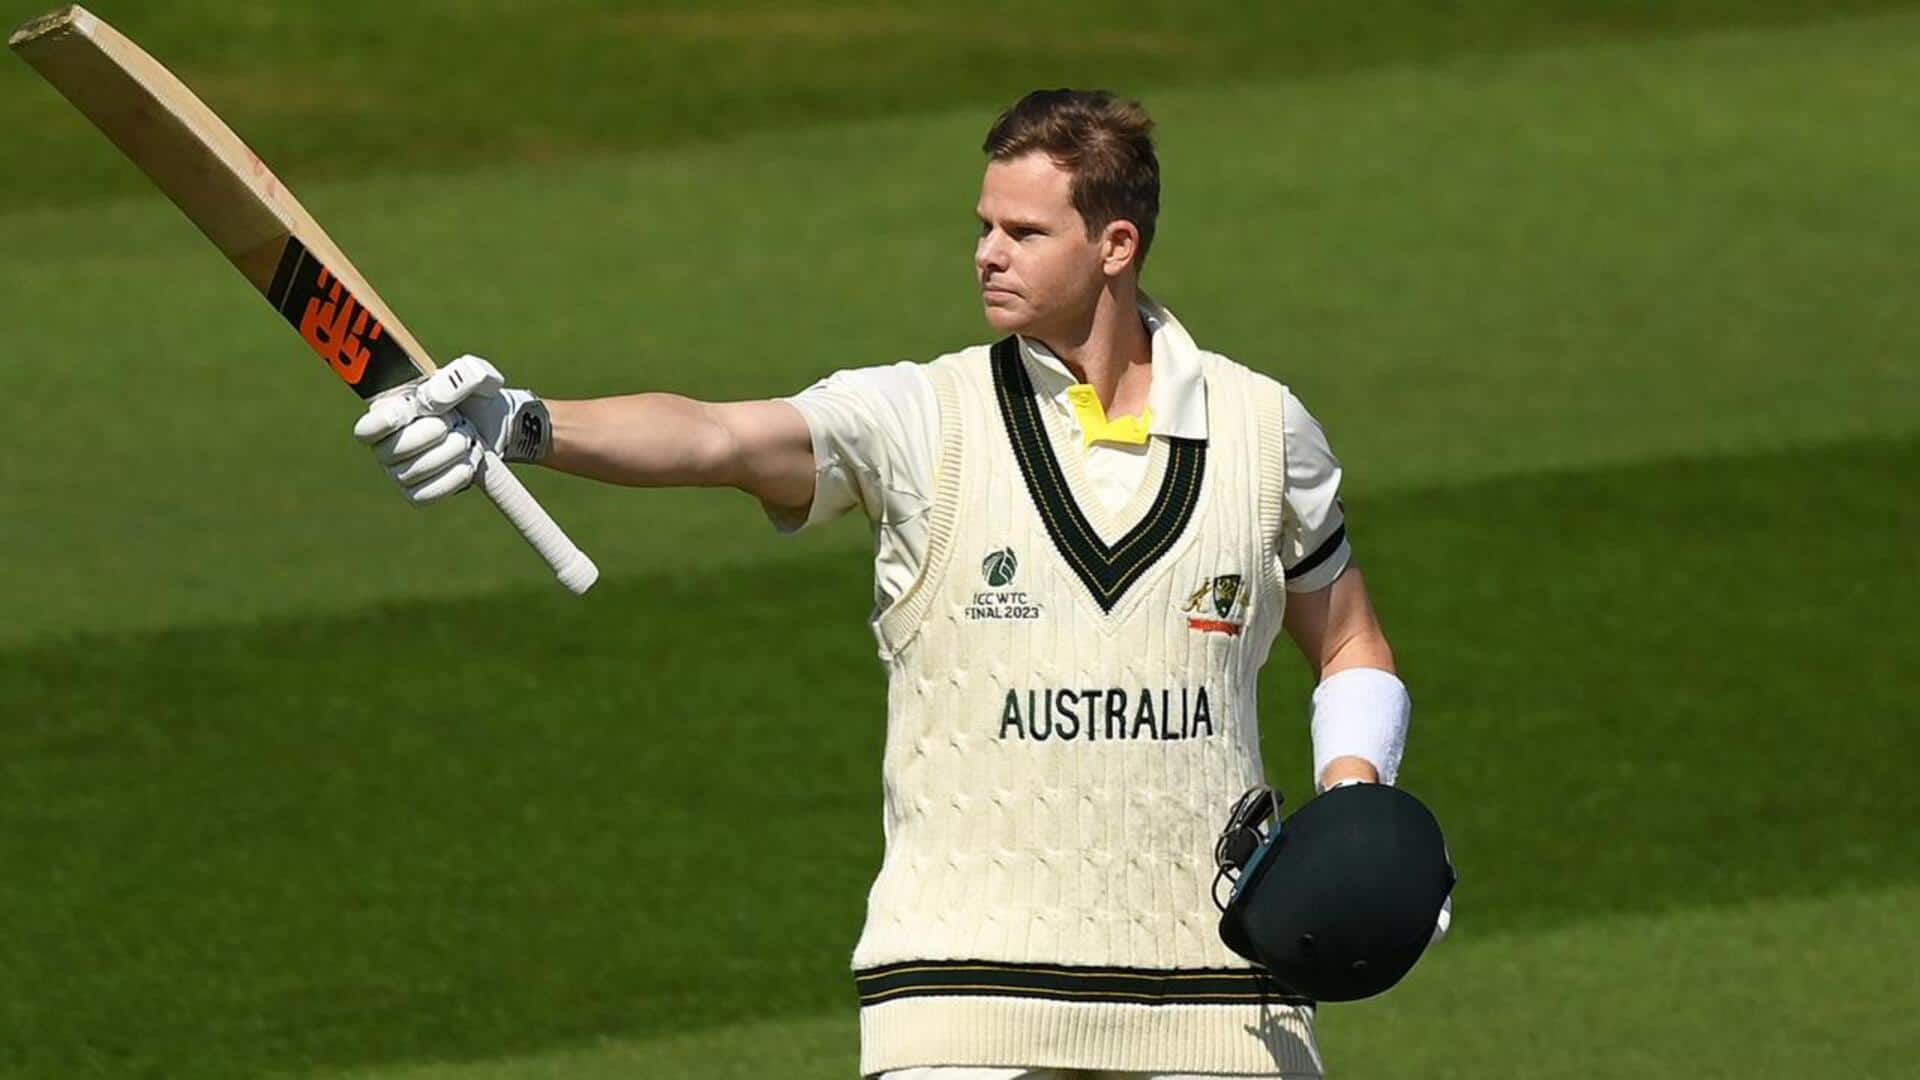 Steve Smith averages over 58 against New Zealand in Tests